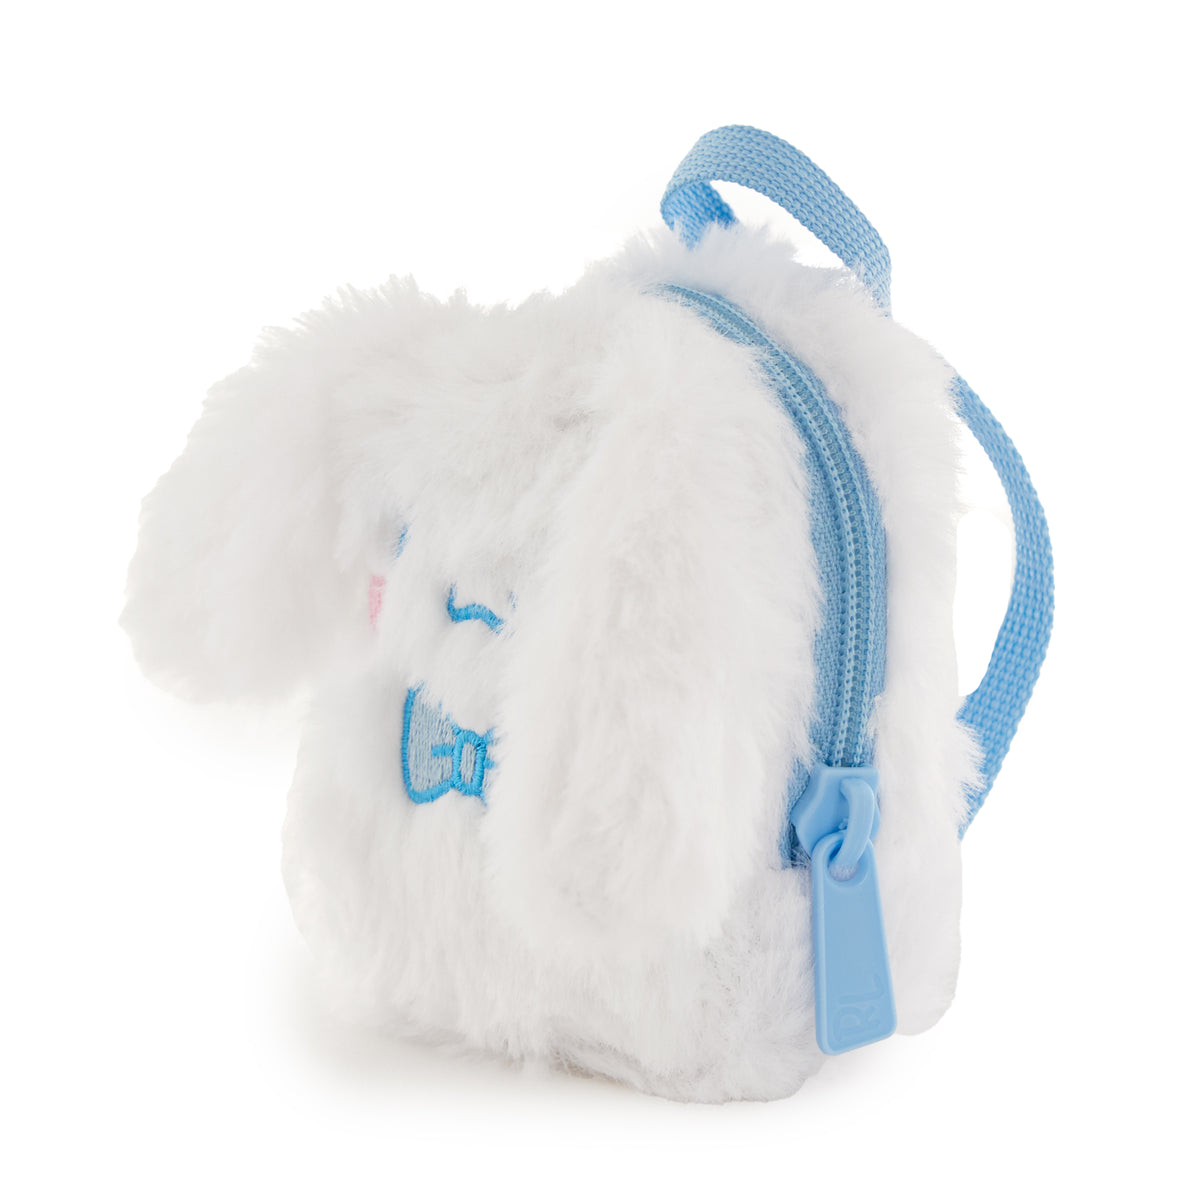 Cinnamoroll Real Littles Micro Backpack Accessory License 2 Play Toys   